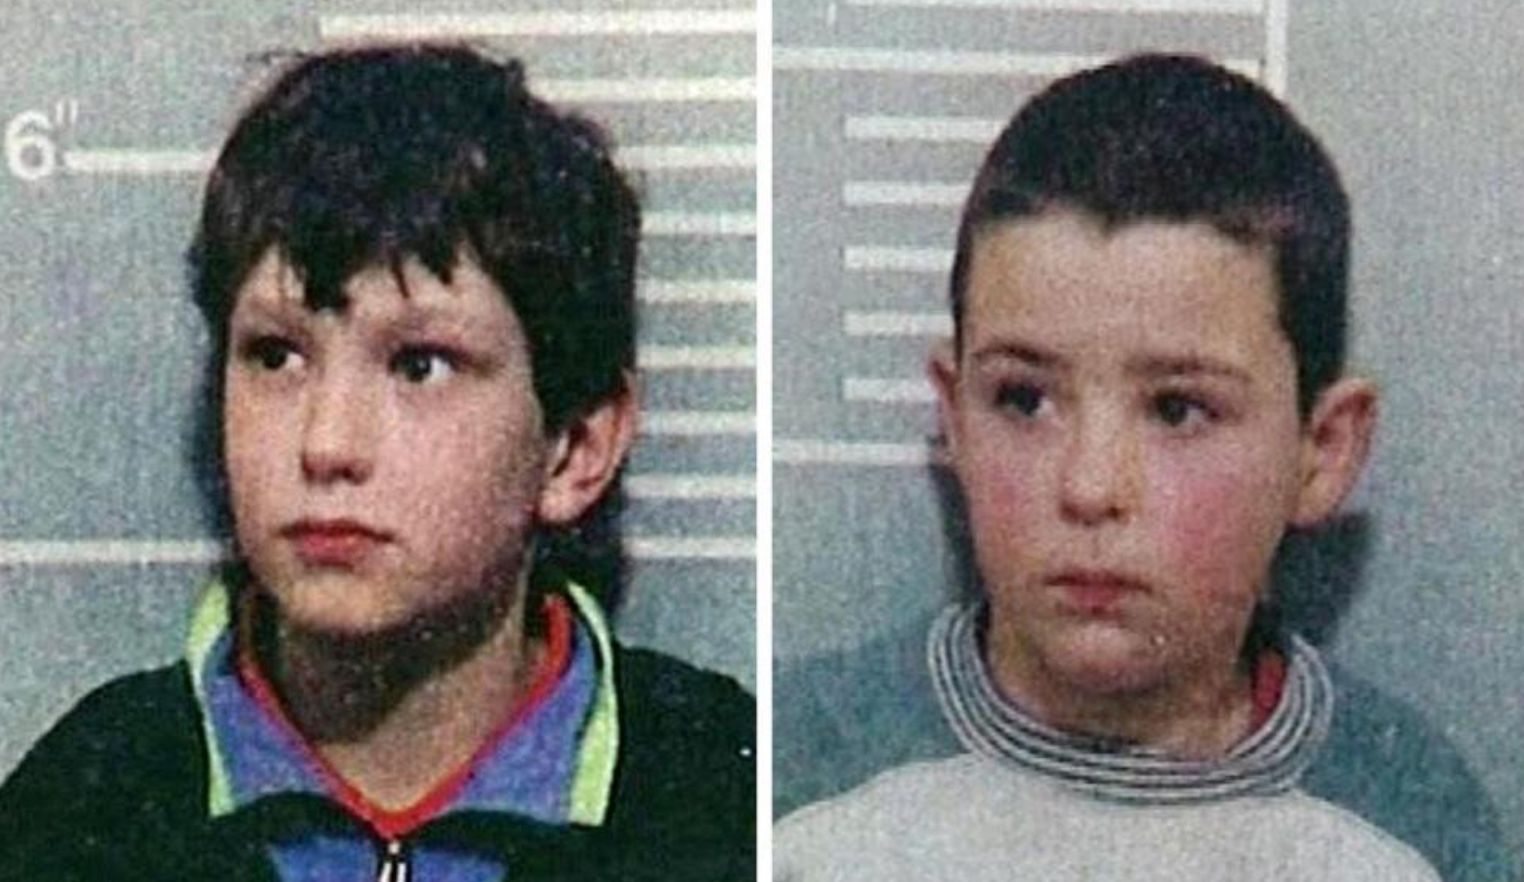 <strong>Robert Thompson and Jon Venables were both 10-years-old when they murdered James Bulger</strong>